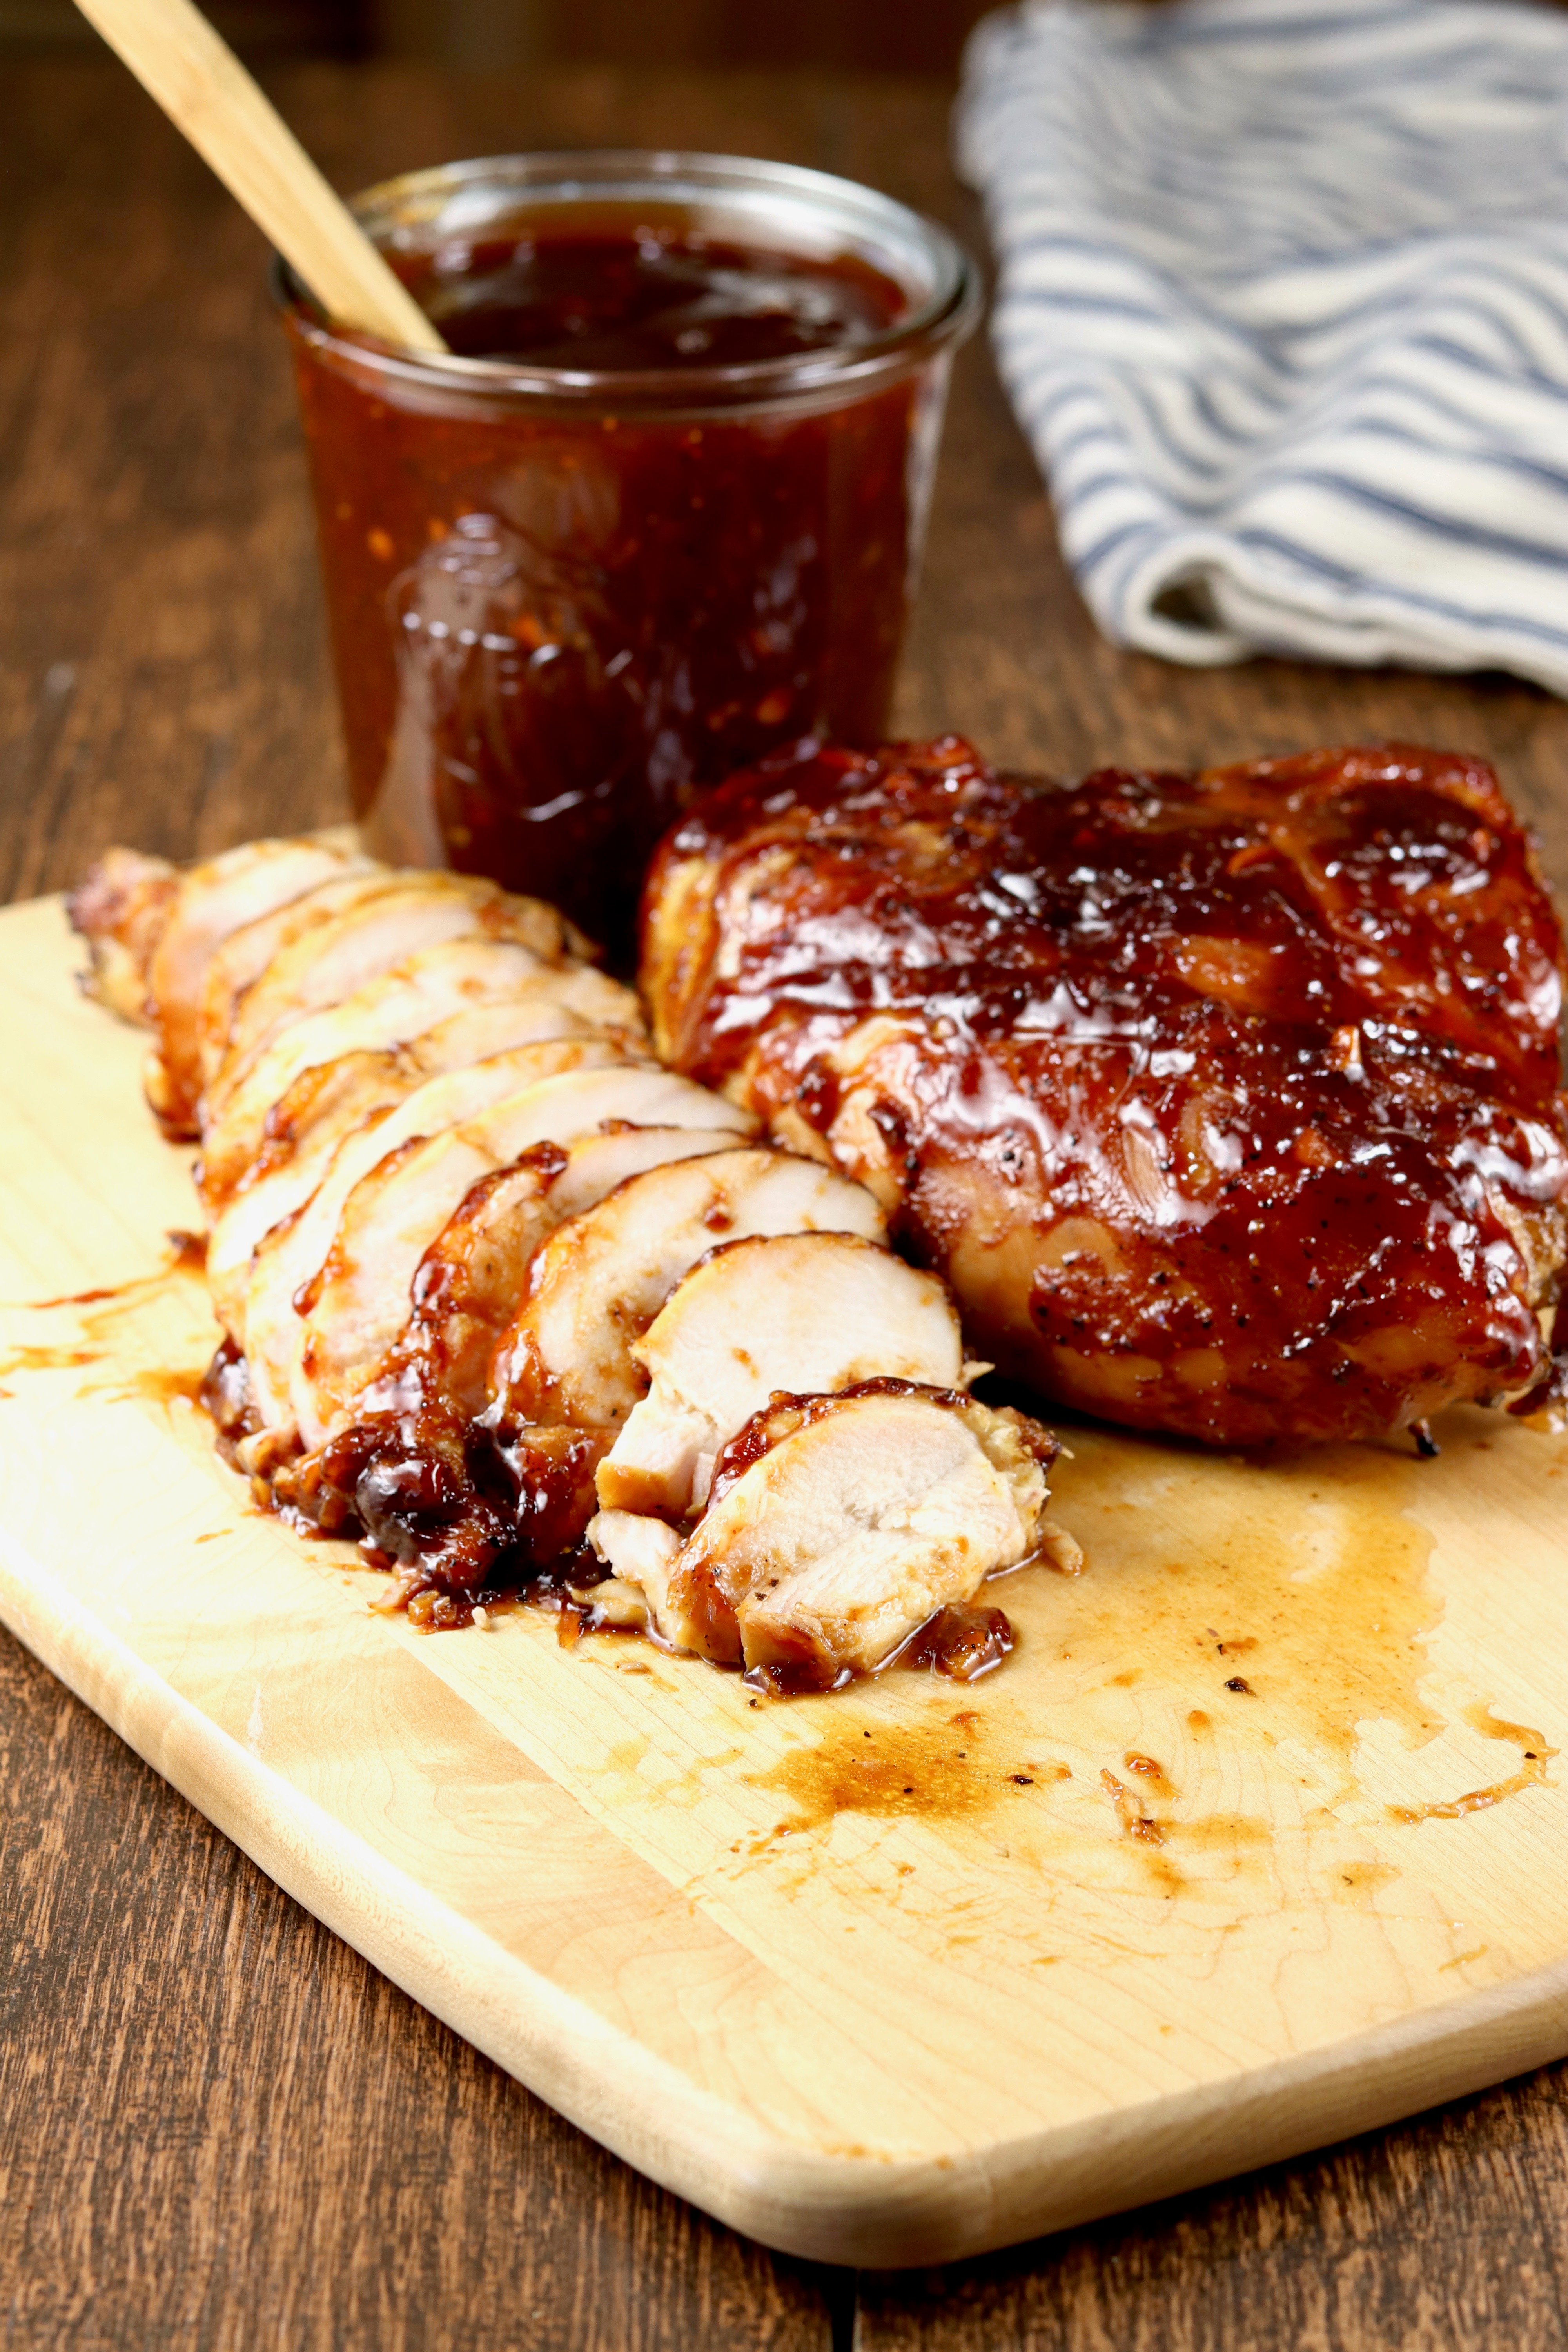 Grilled Bbq Chicken Video Secrets To Keep It Juicy Miss In The Kitchen,Stainless Steel Gas Grills On Sale